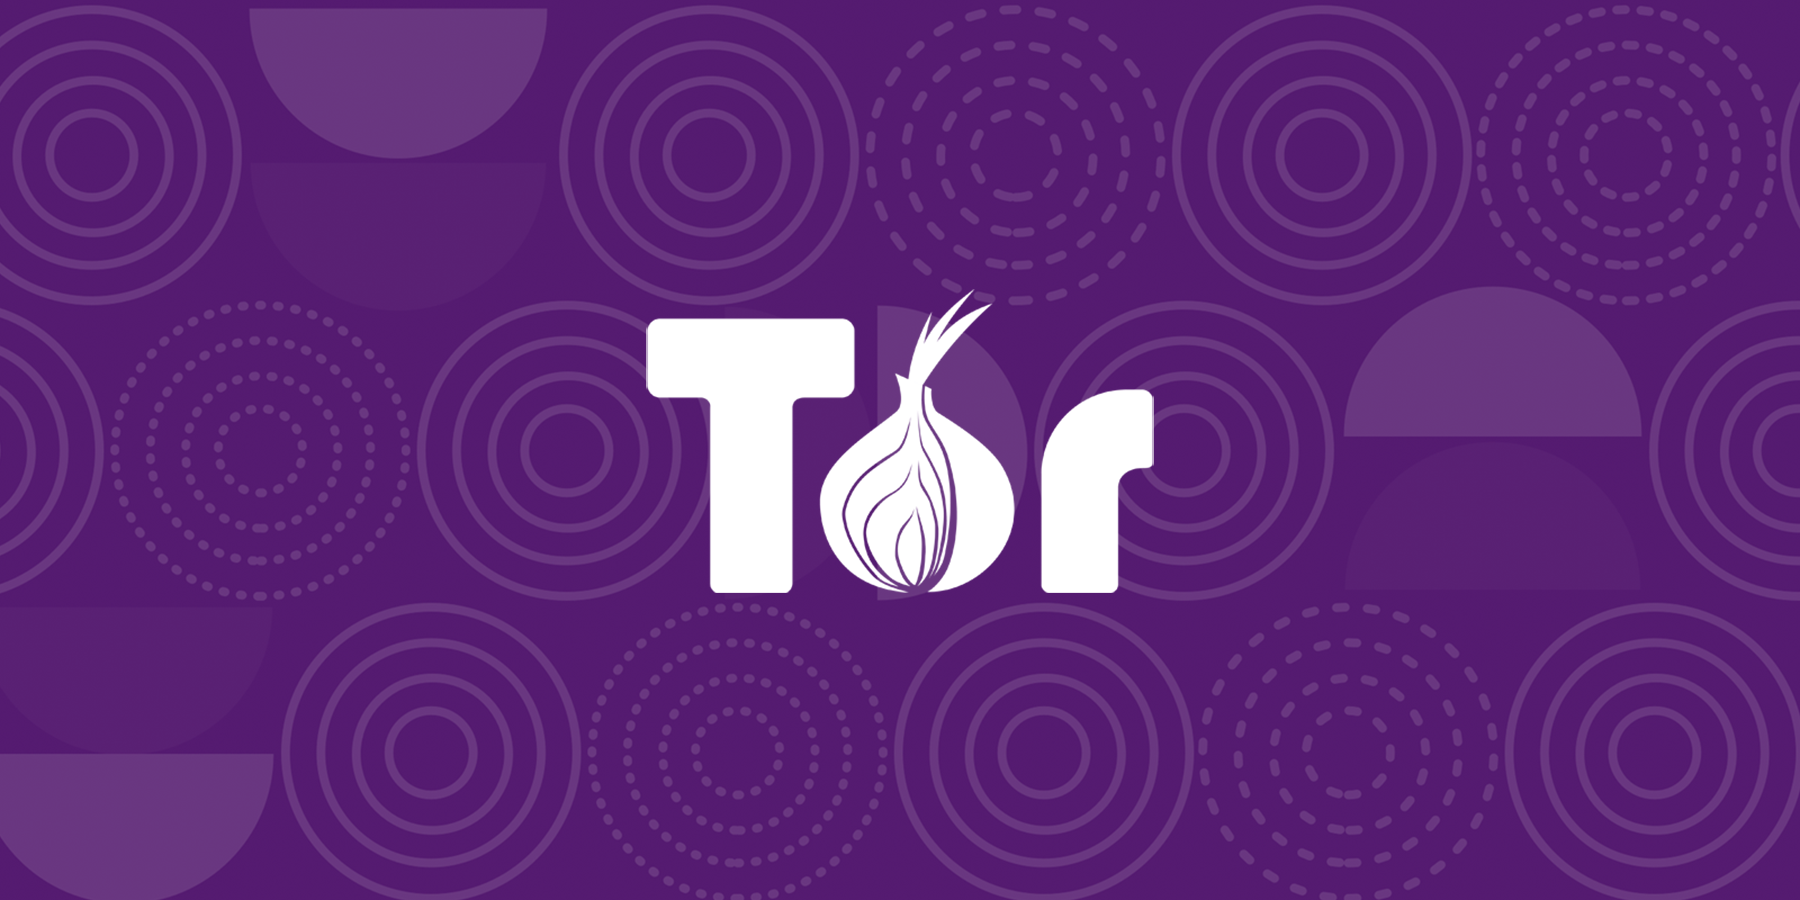 The Tor Project logo, featuring the word ‘Tor’ in white with the letter ‘o’ stylized as an onion shape, on a purple background.